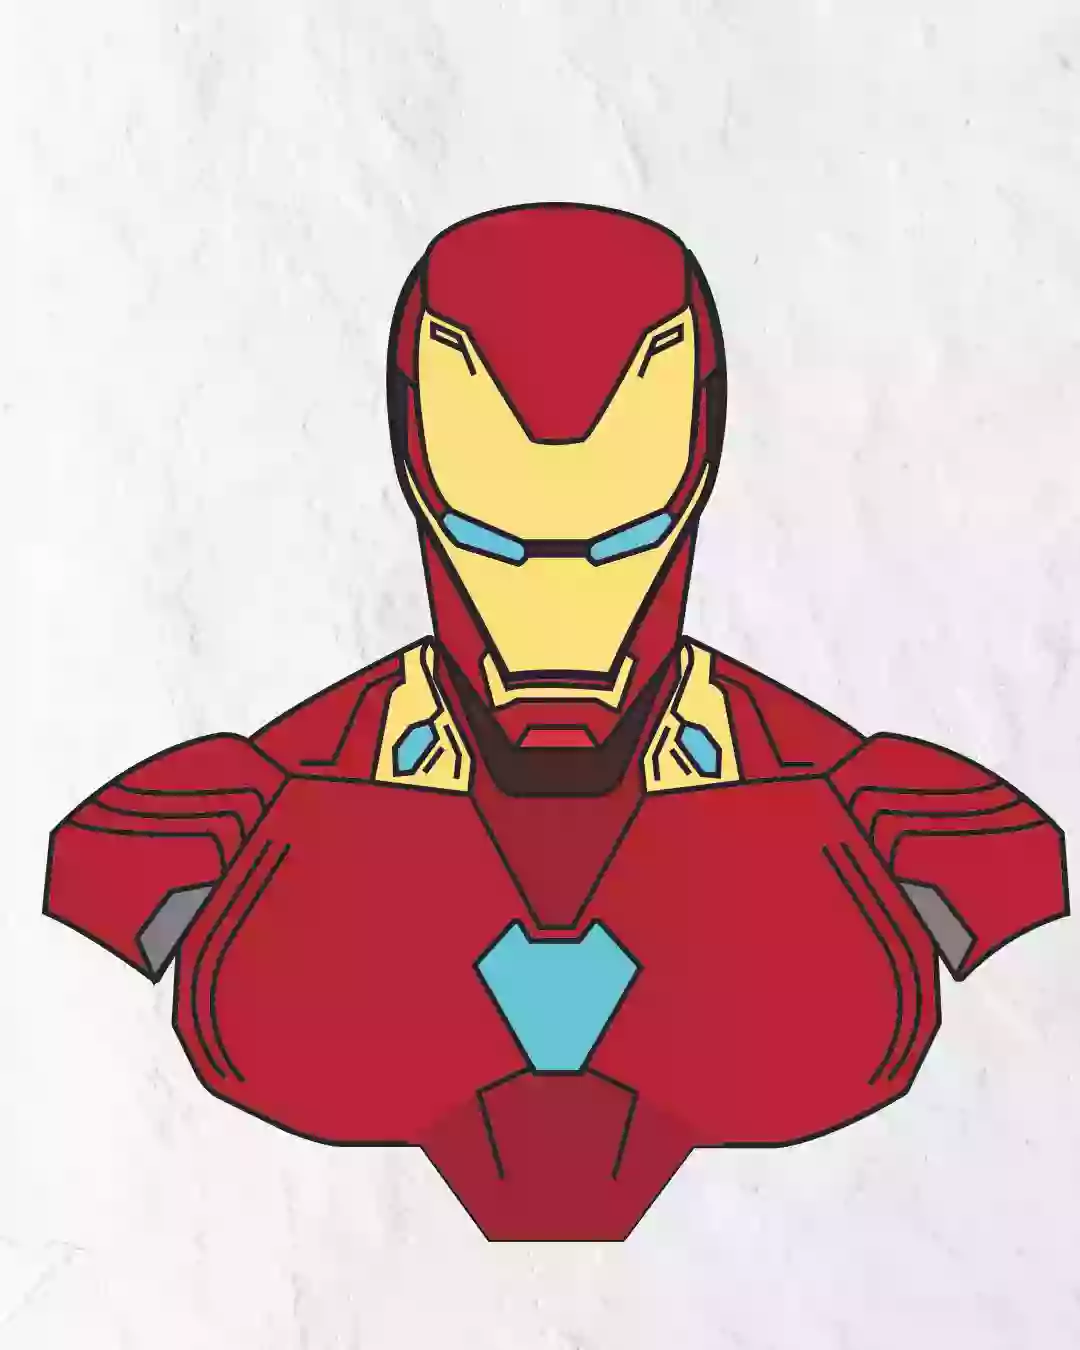 How to draw Iron Man | Step by step Drawing tutorials